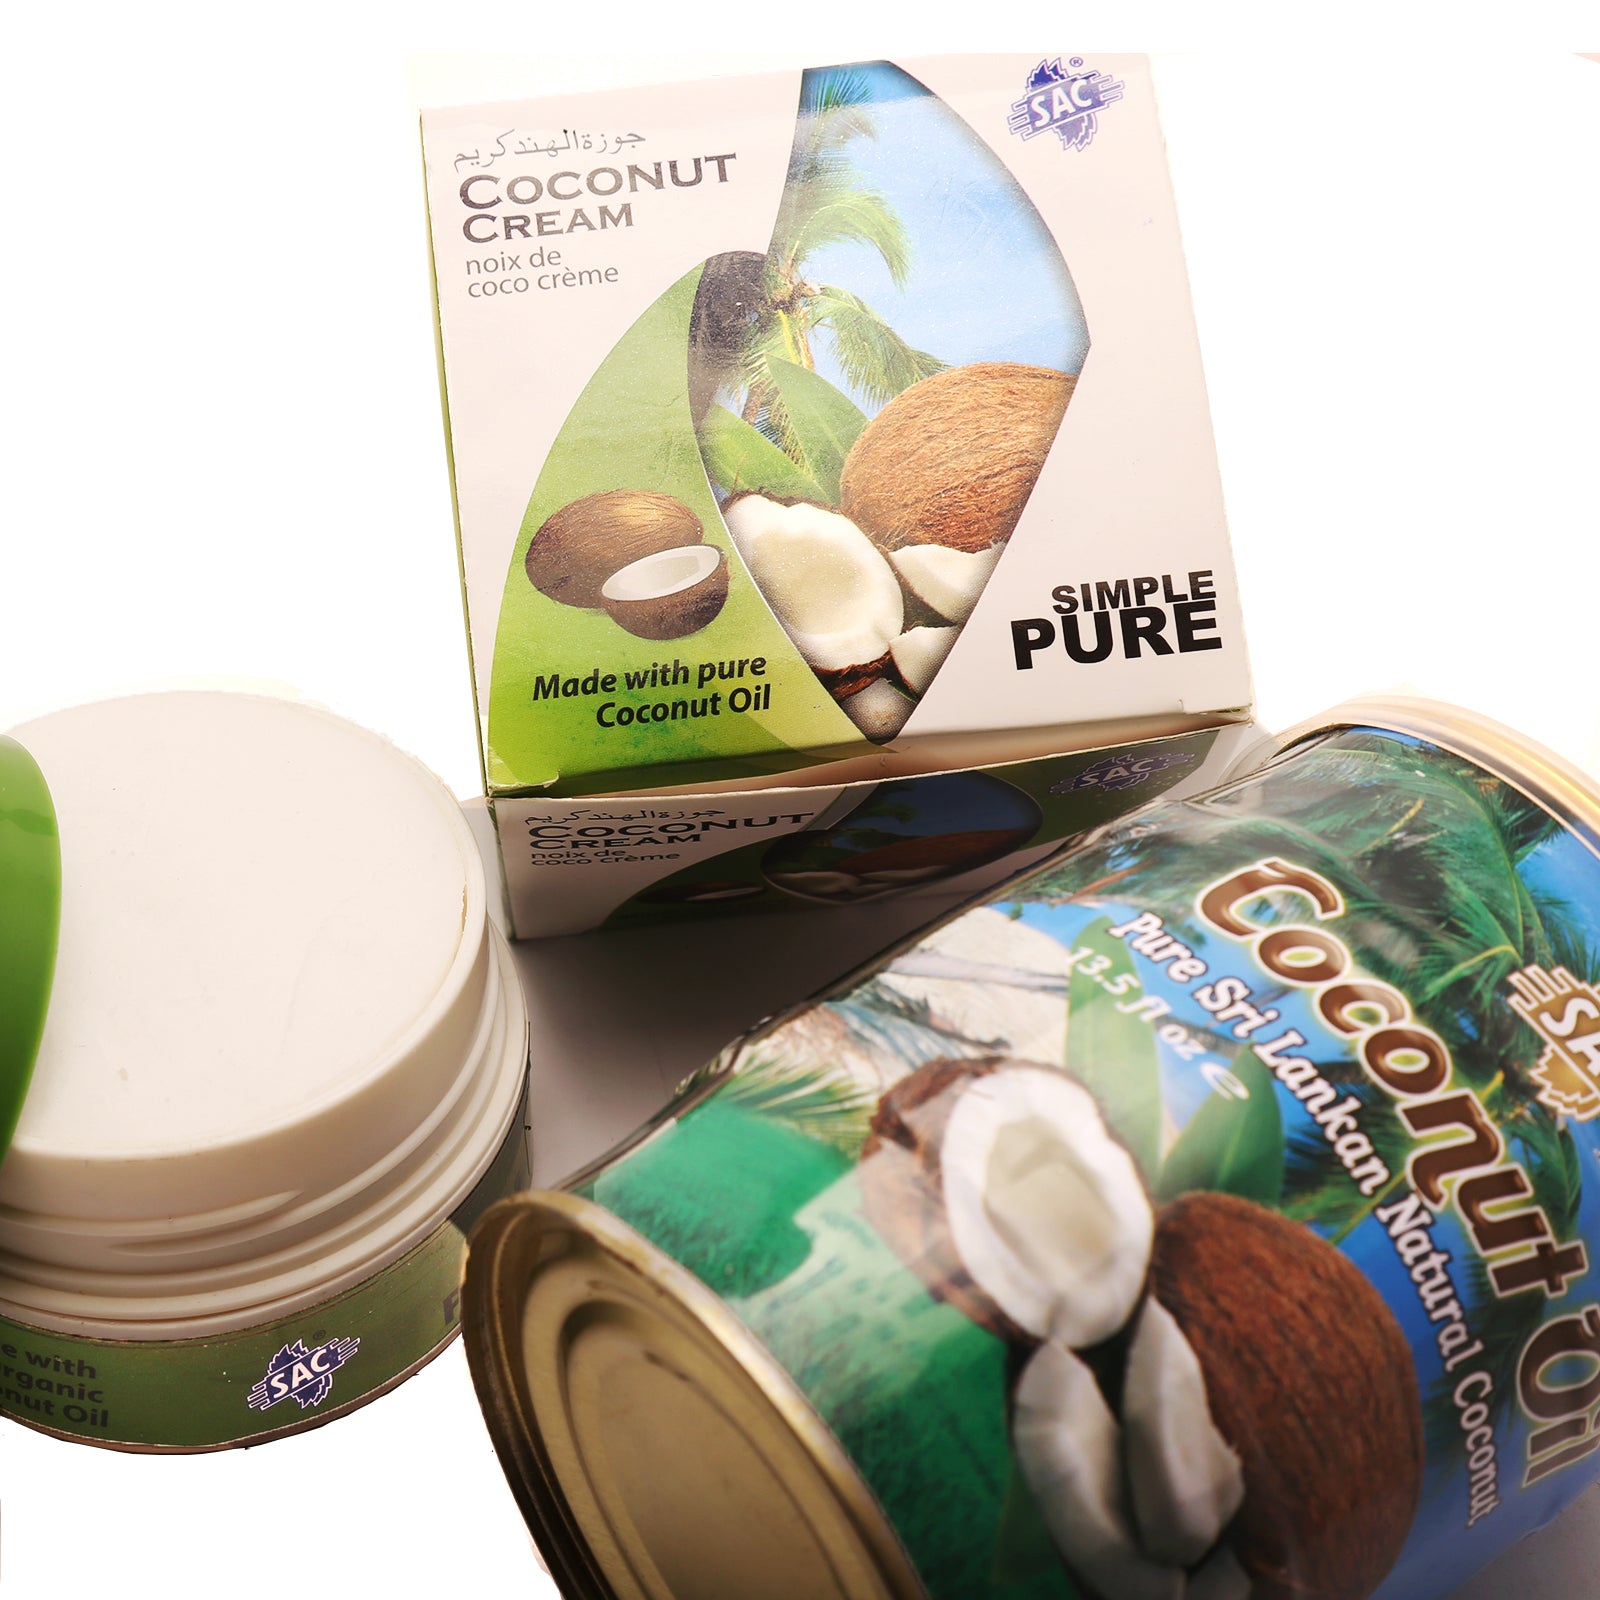 Coconut Oil and Cream - Pack of Coconut Oil And Coconut Cream